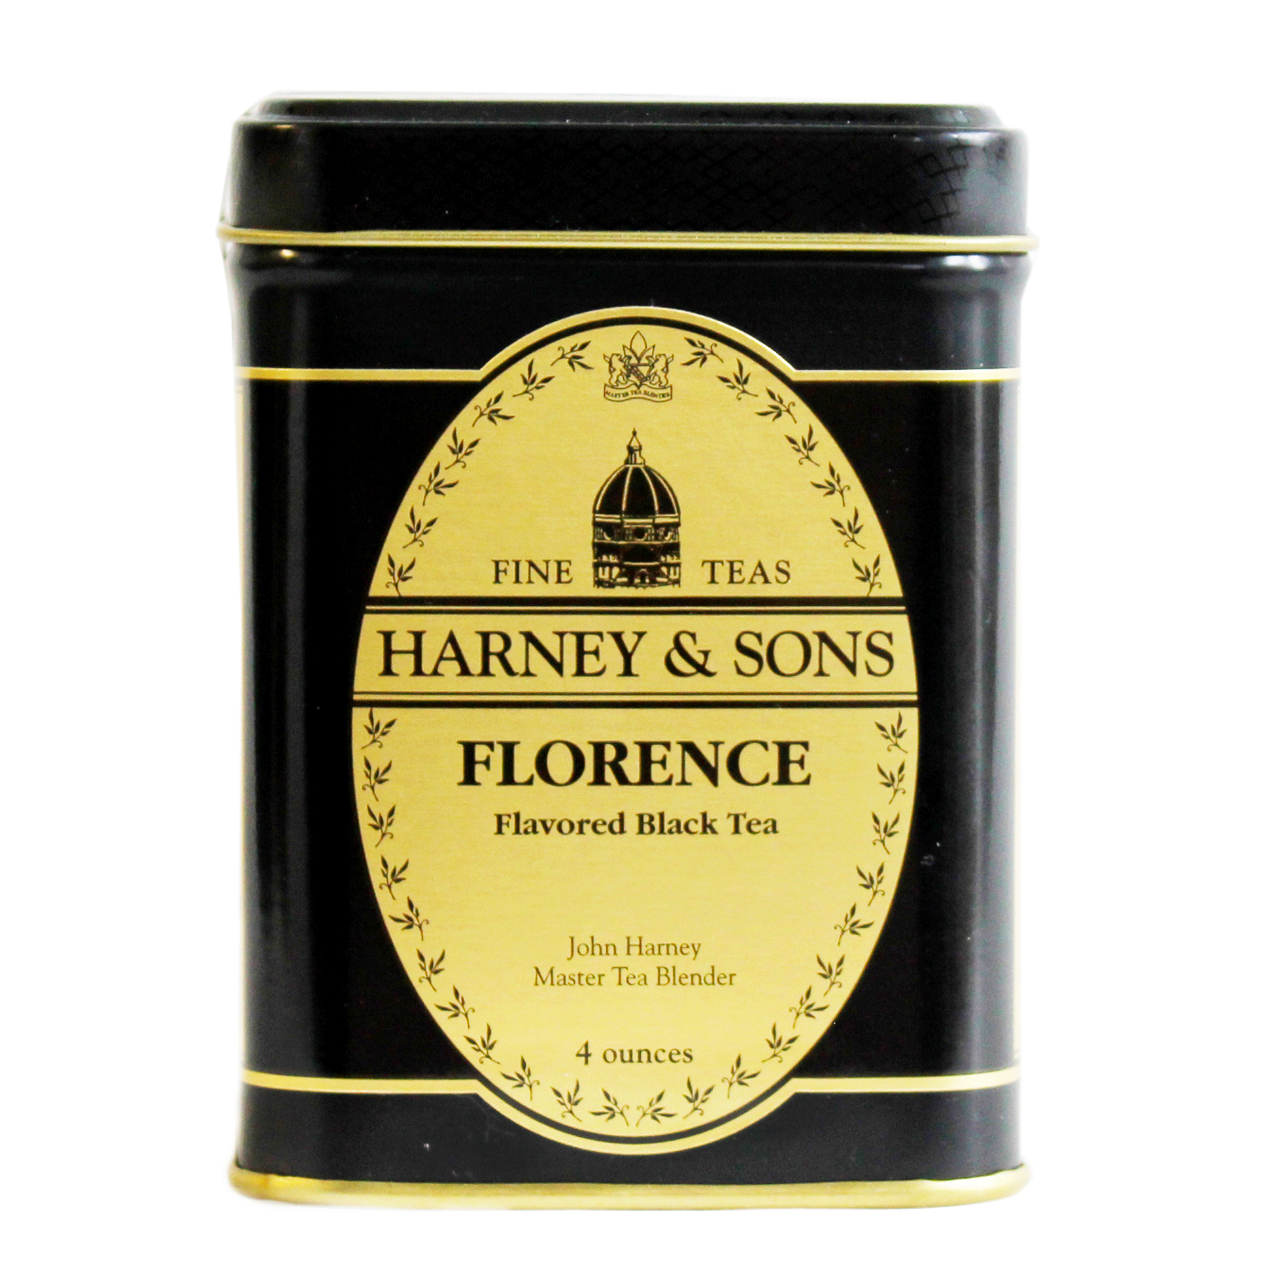 Harney & Sons Florence